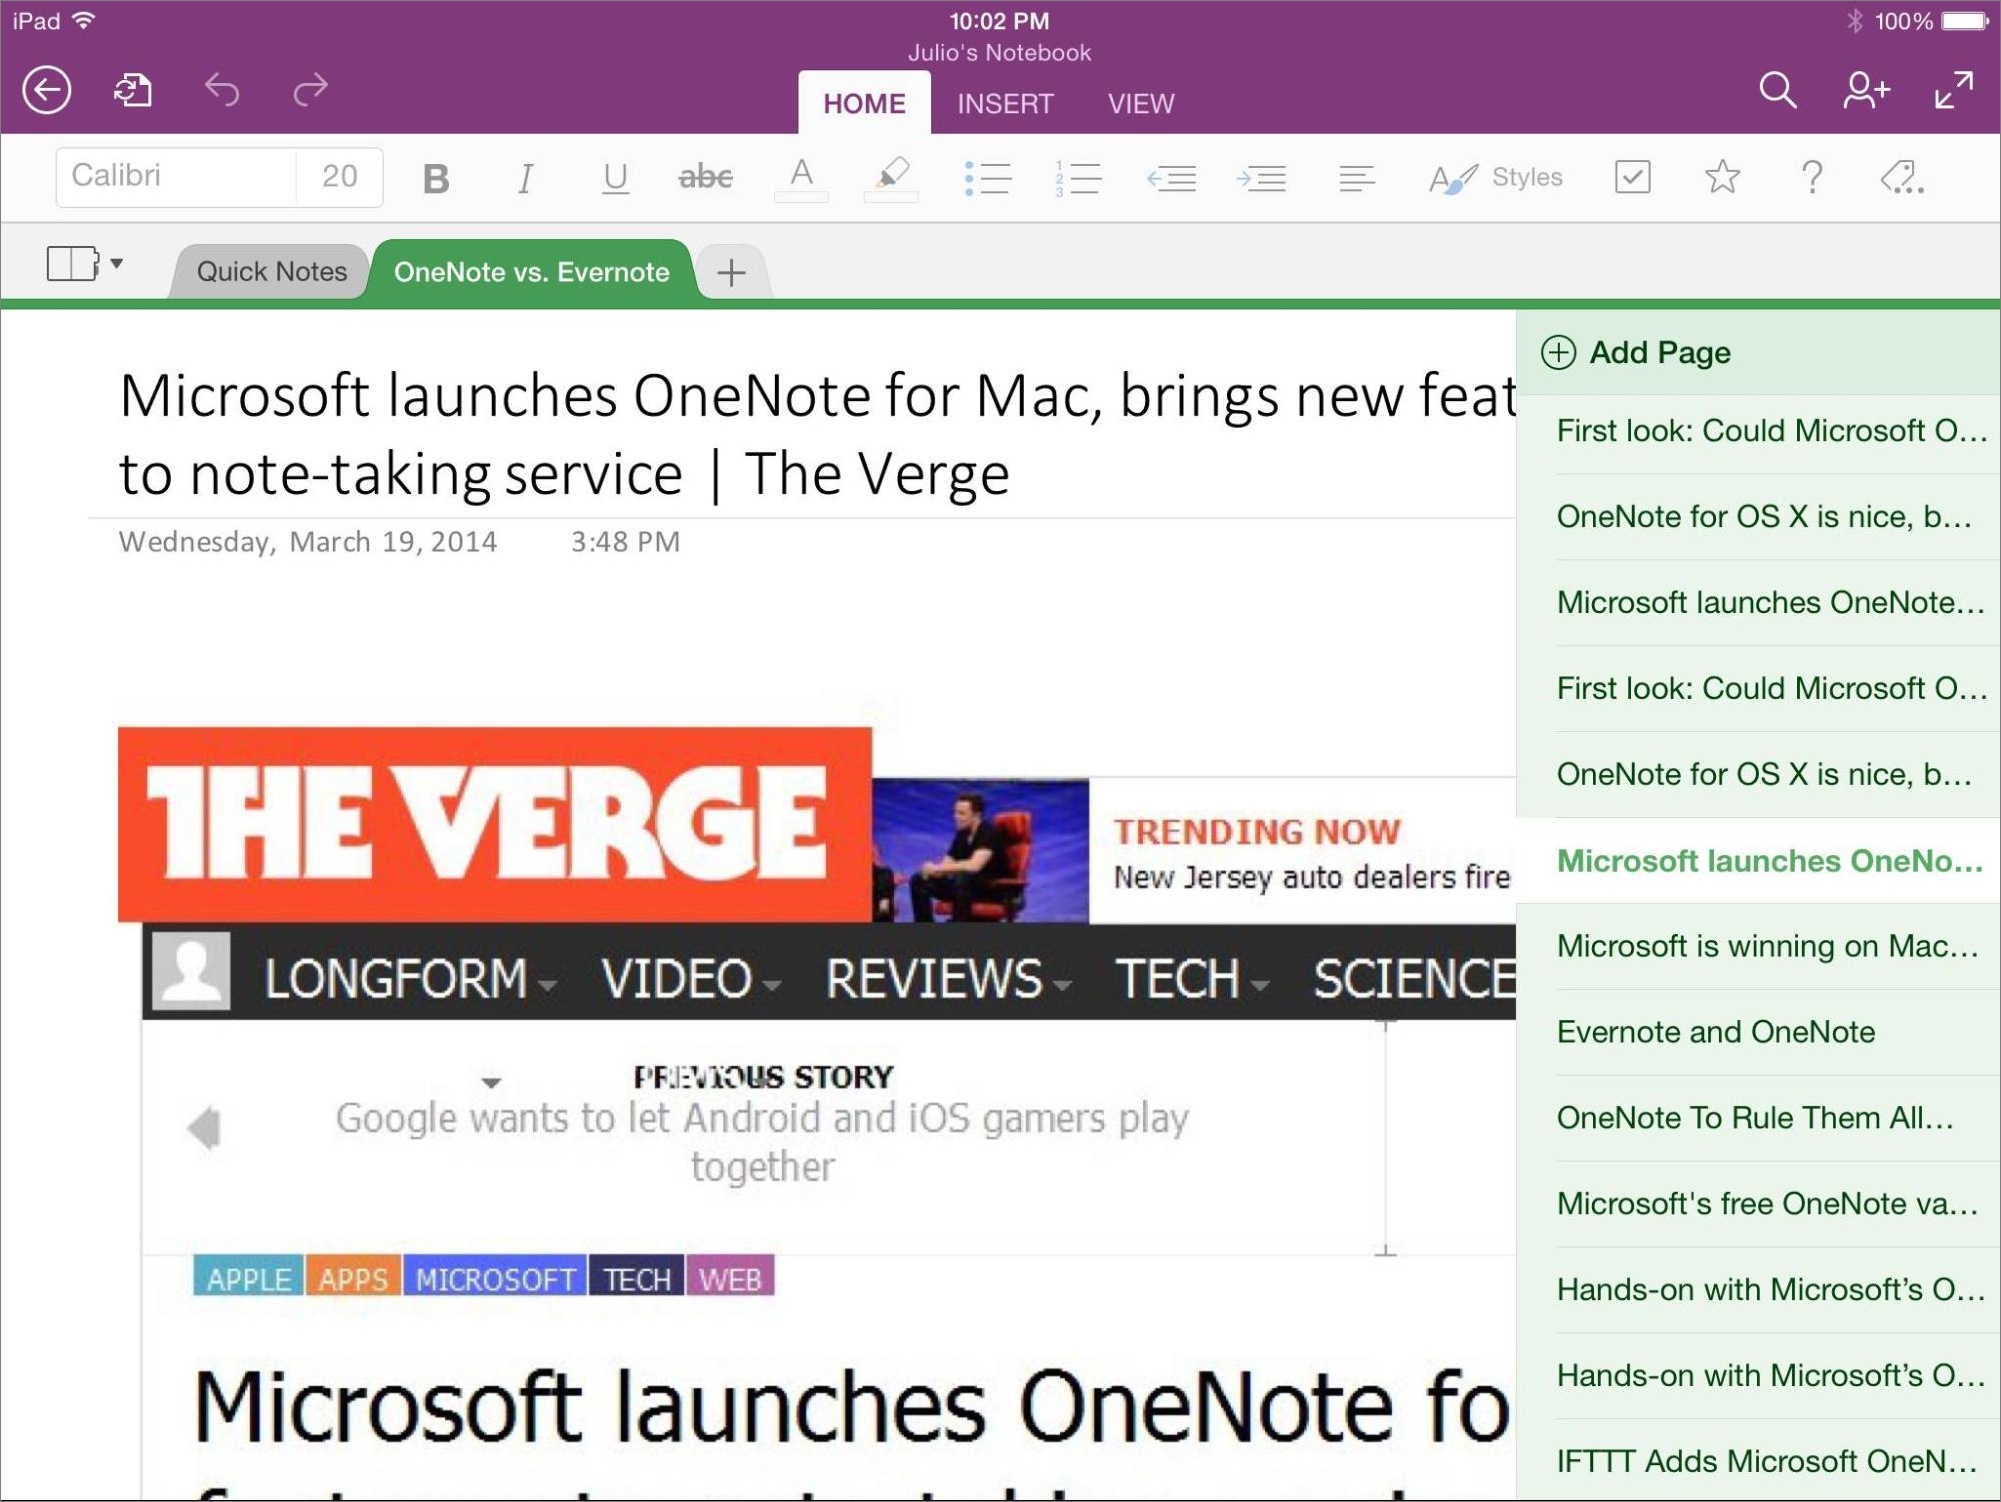 onenote and evernote